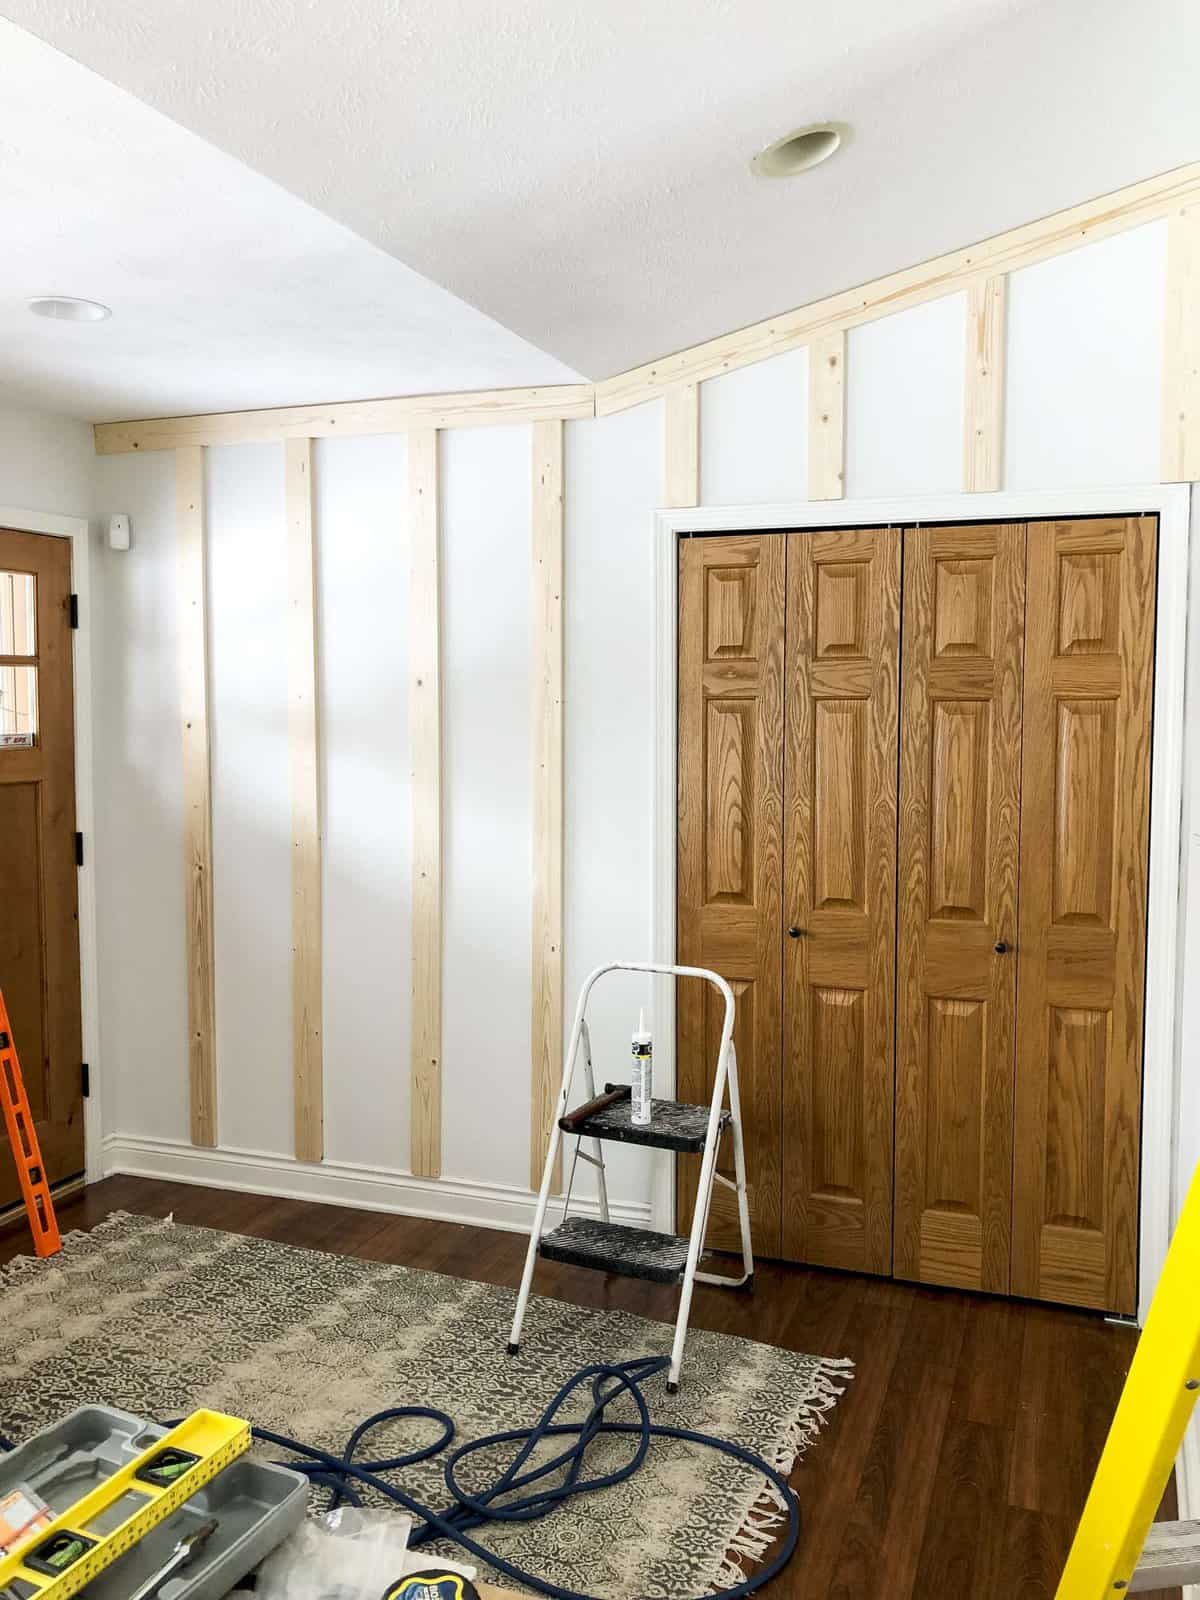 Board and batten is an easy and affordable way to create a custom look! Here is a full tutorial for how to install board and batten as an accent wall! #fromhousetohaven #boardandbatten #accentwall